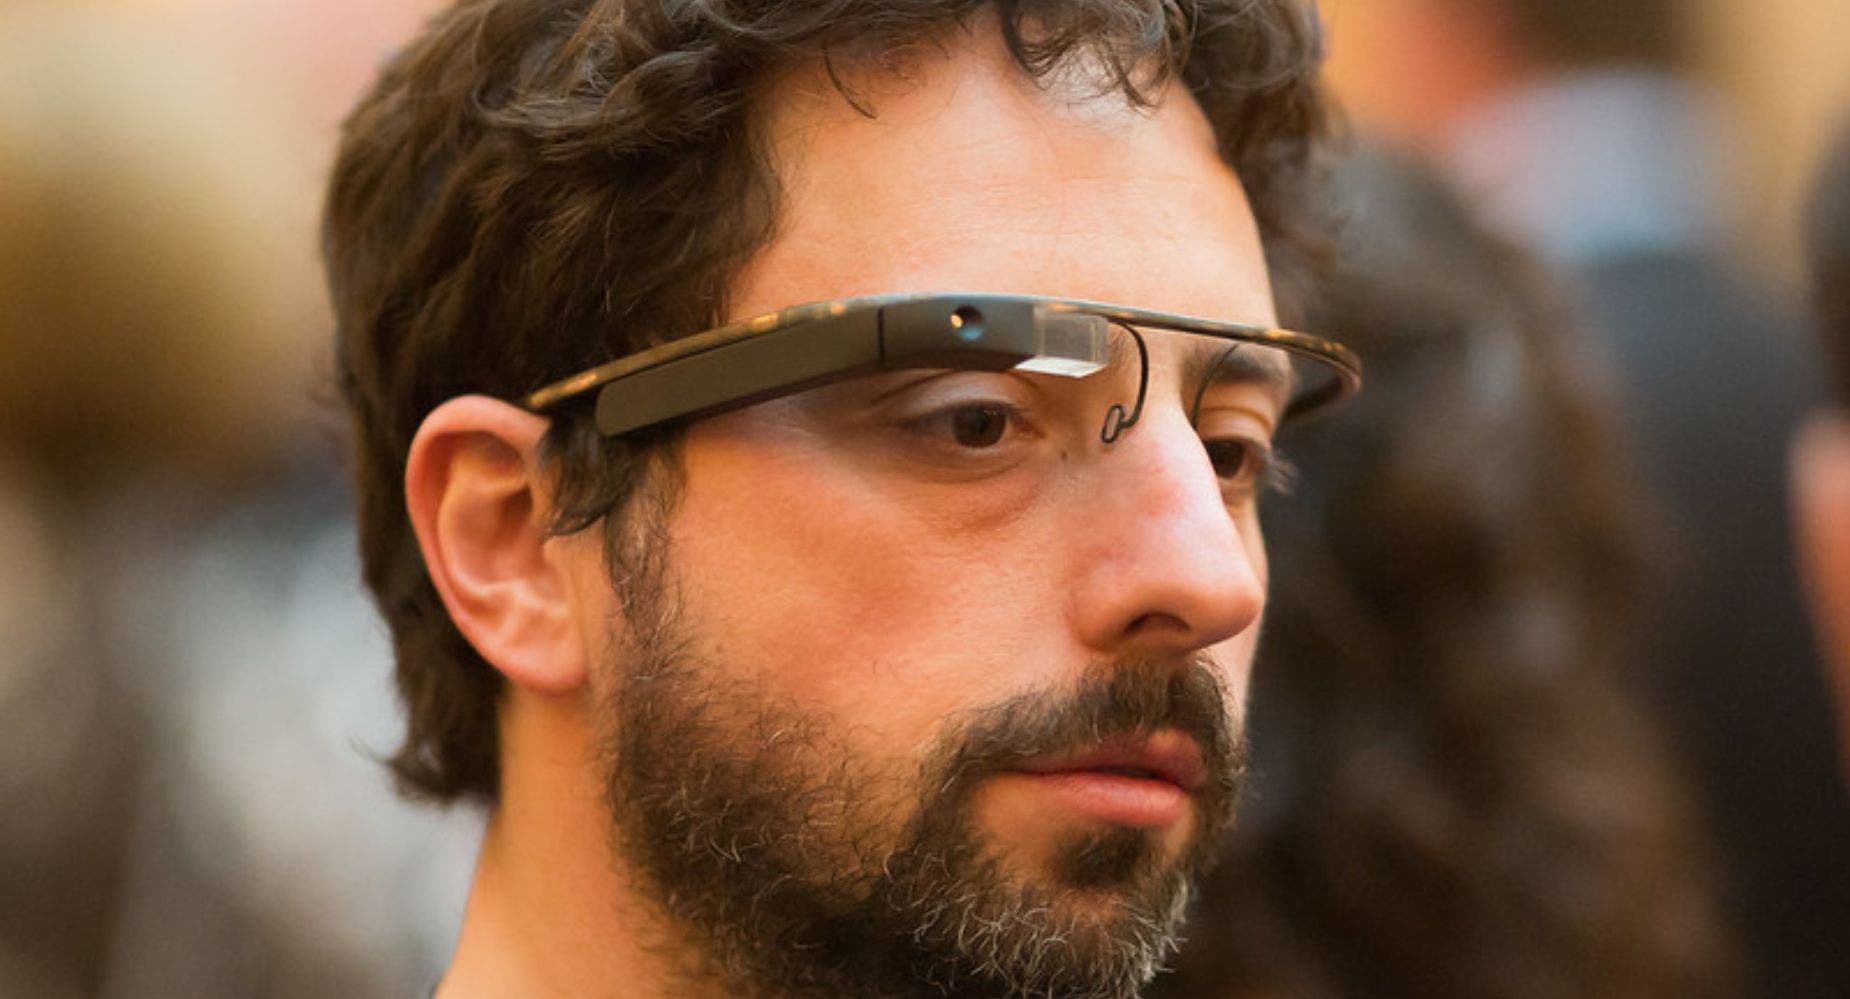 Google Co-Founder Sergey Brin To Sell Tesla Stock After Musk Affair: Here's How Much He'll Likely Make